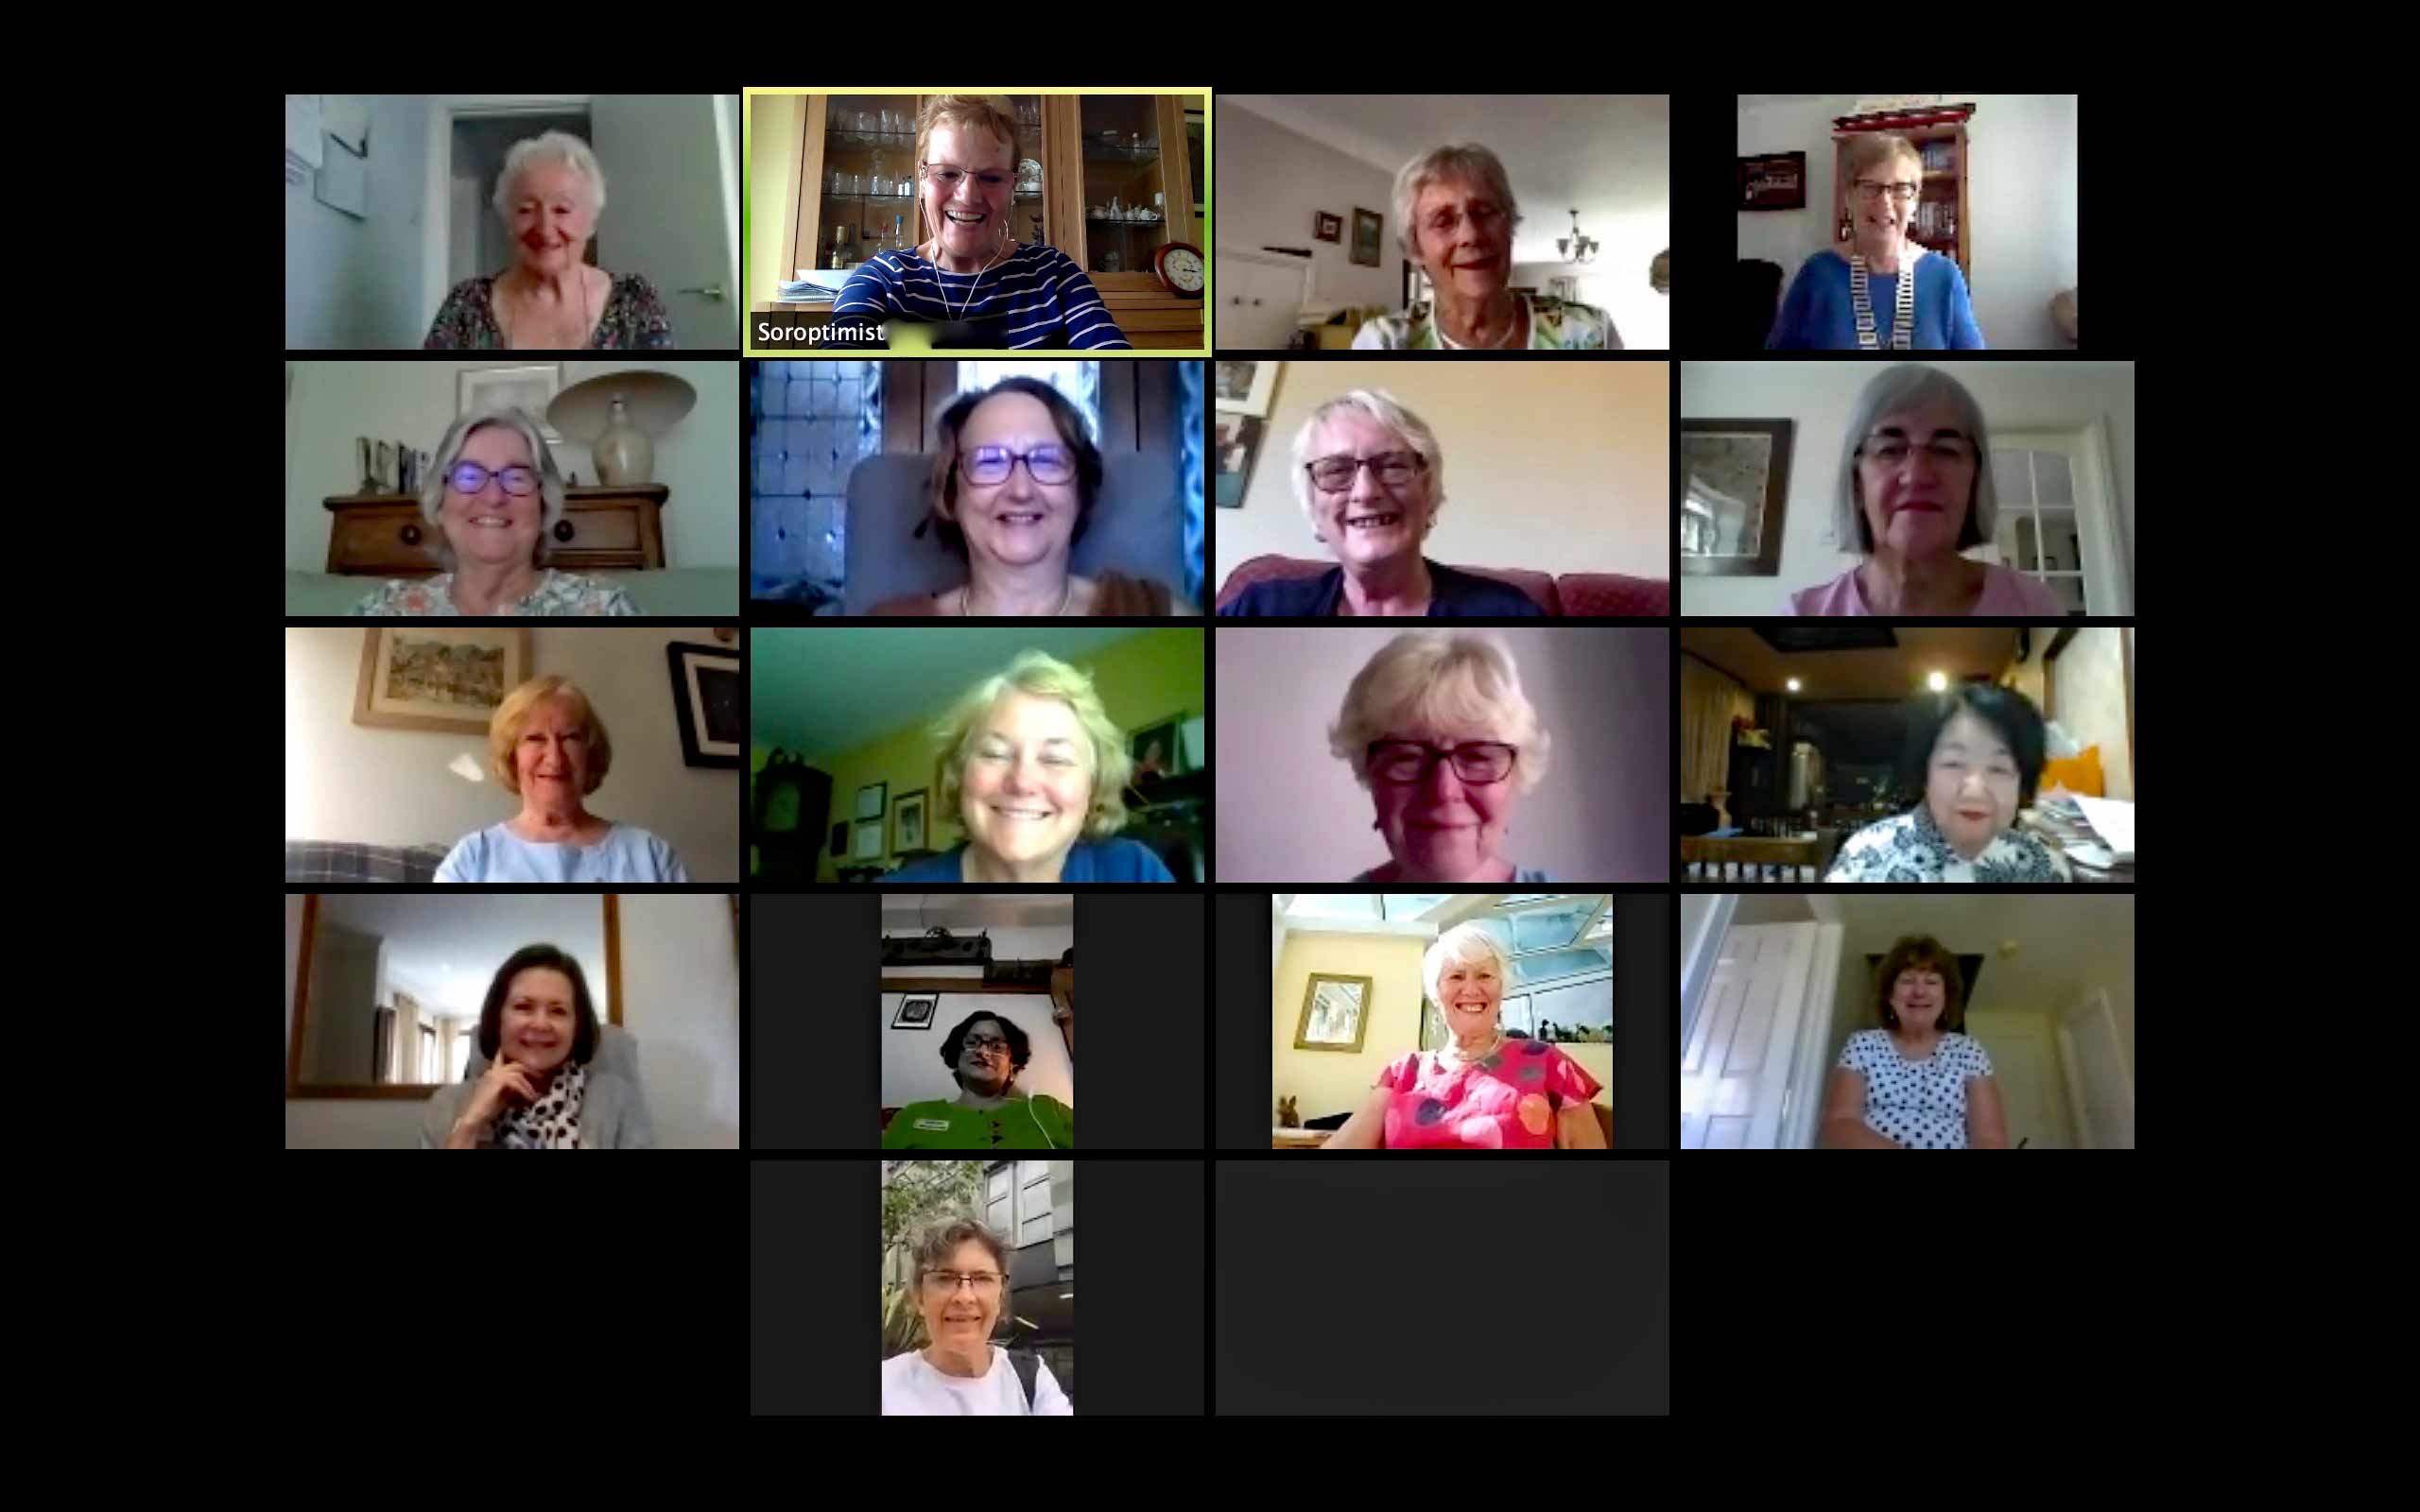 Zoom photo taken on 31st July at Soroptimist International of Harrogate and District Club Friendship Link members and their counterparts in Clubs in Belgium, England, Japan, Malawi, Scotland, South Africa and the United states as well as Federation Friendship Link Coordinator from India